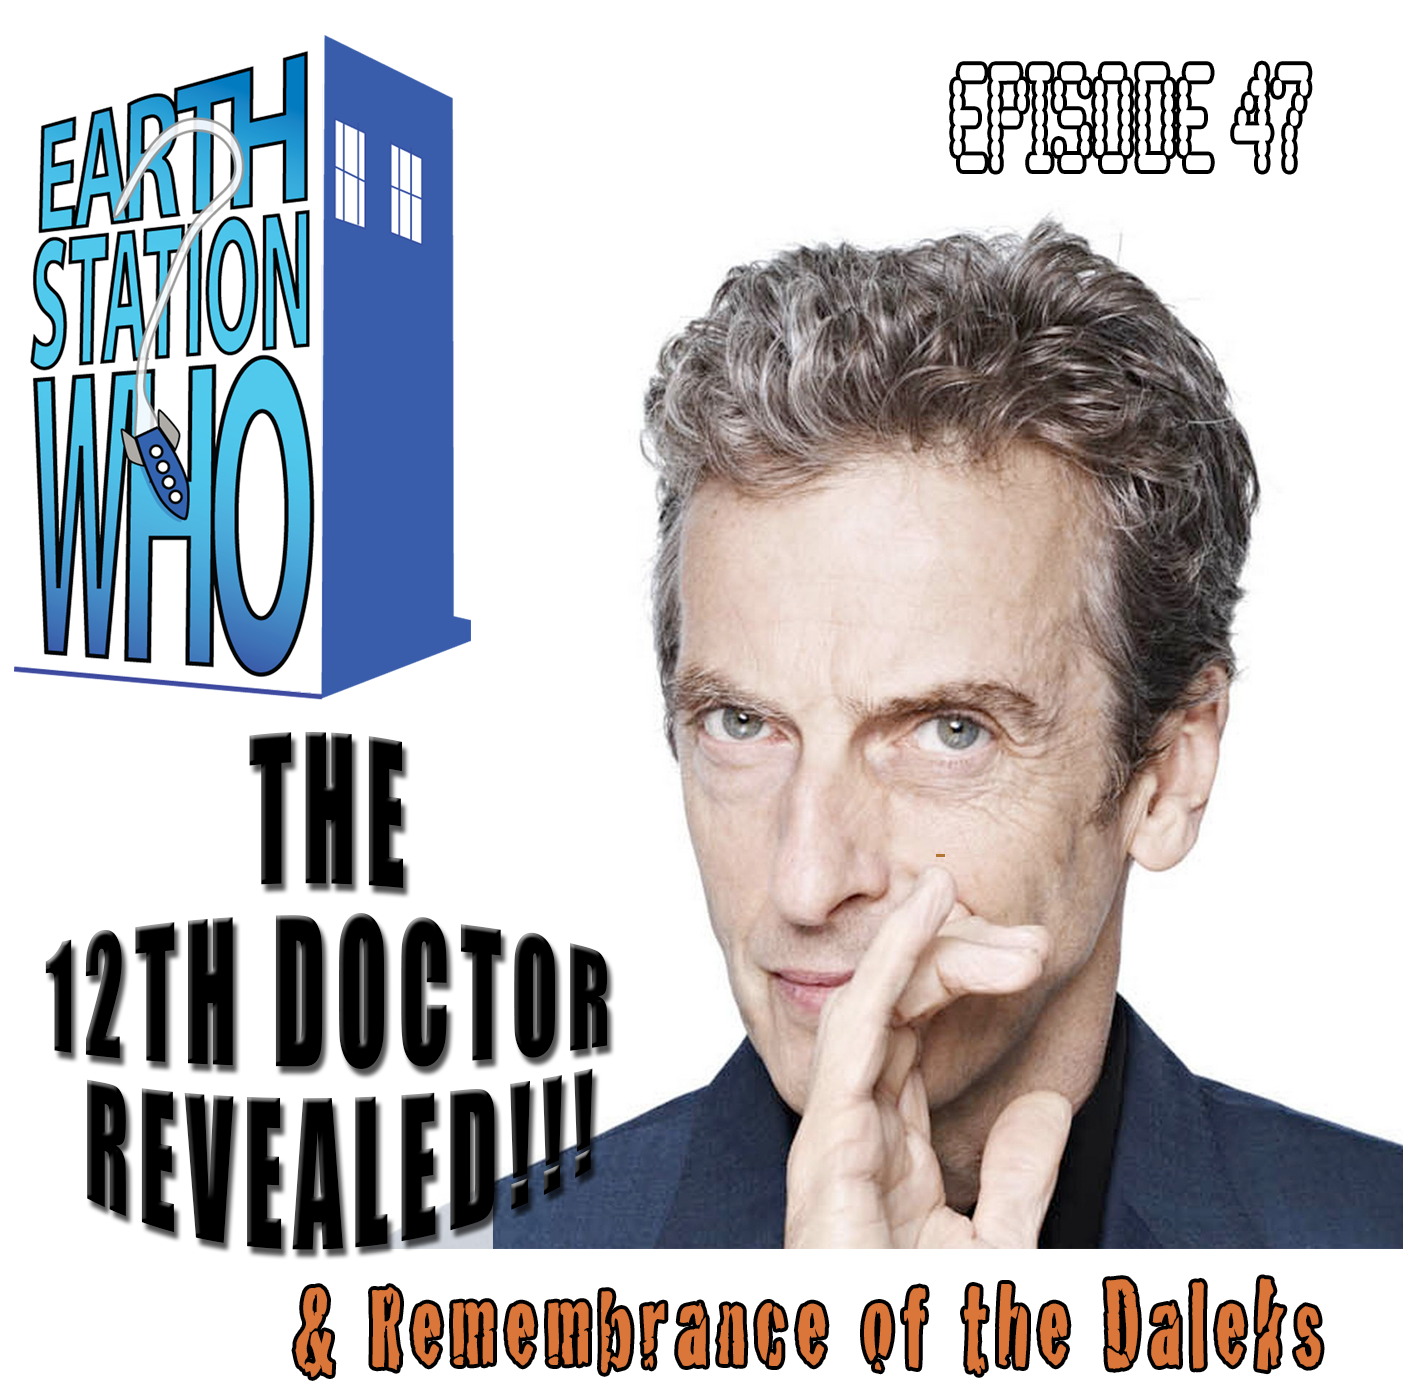 Earth Station Who Episode 47